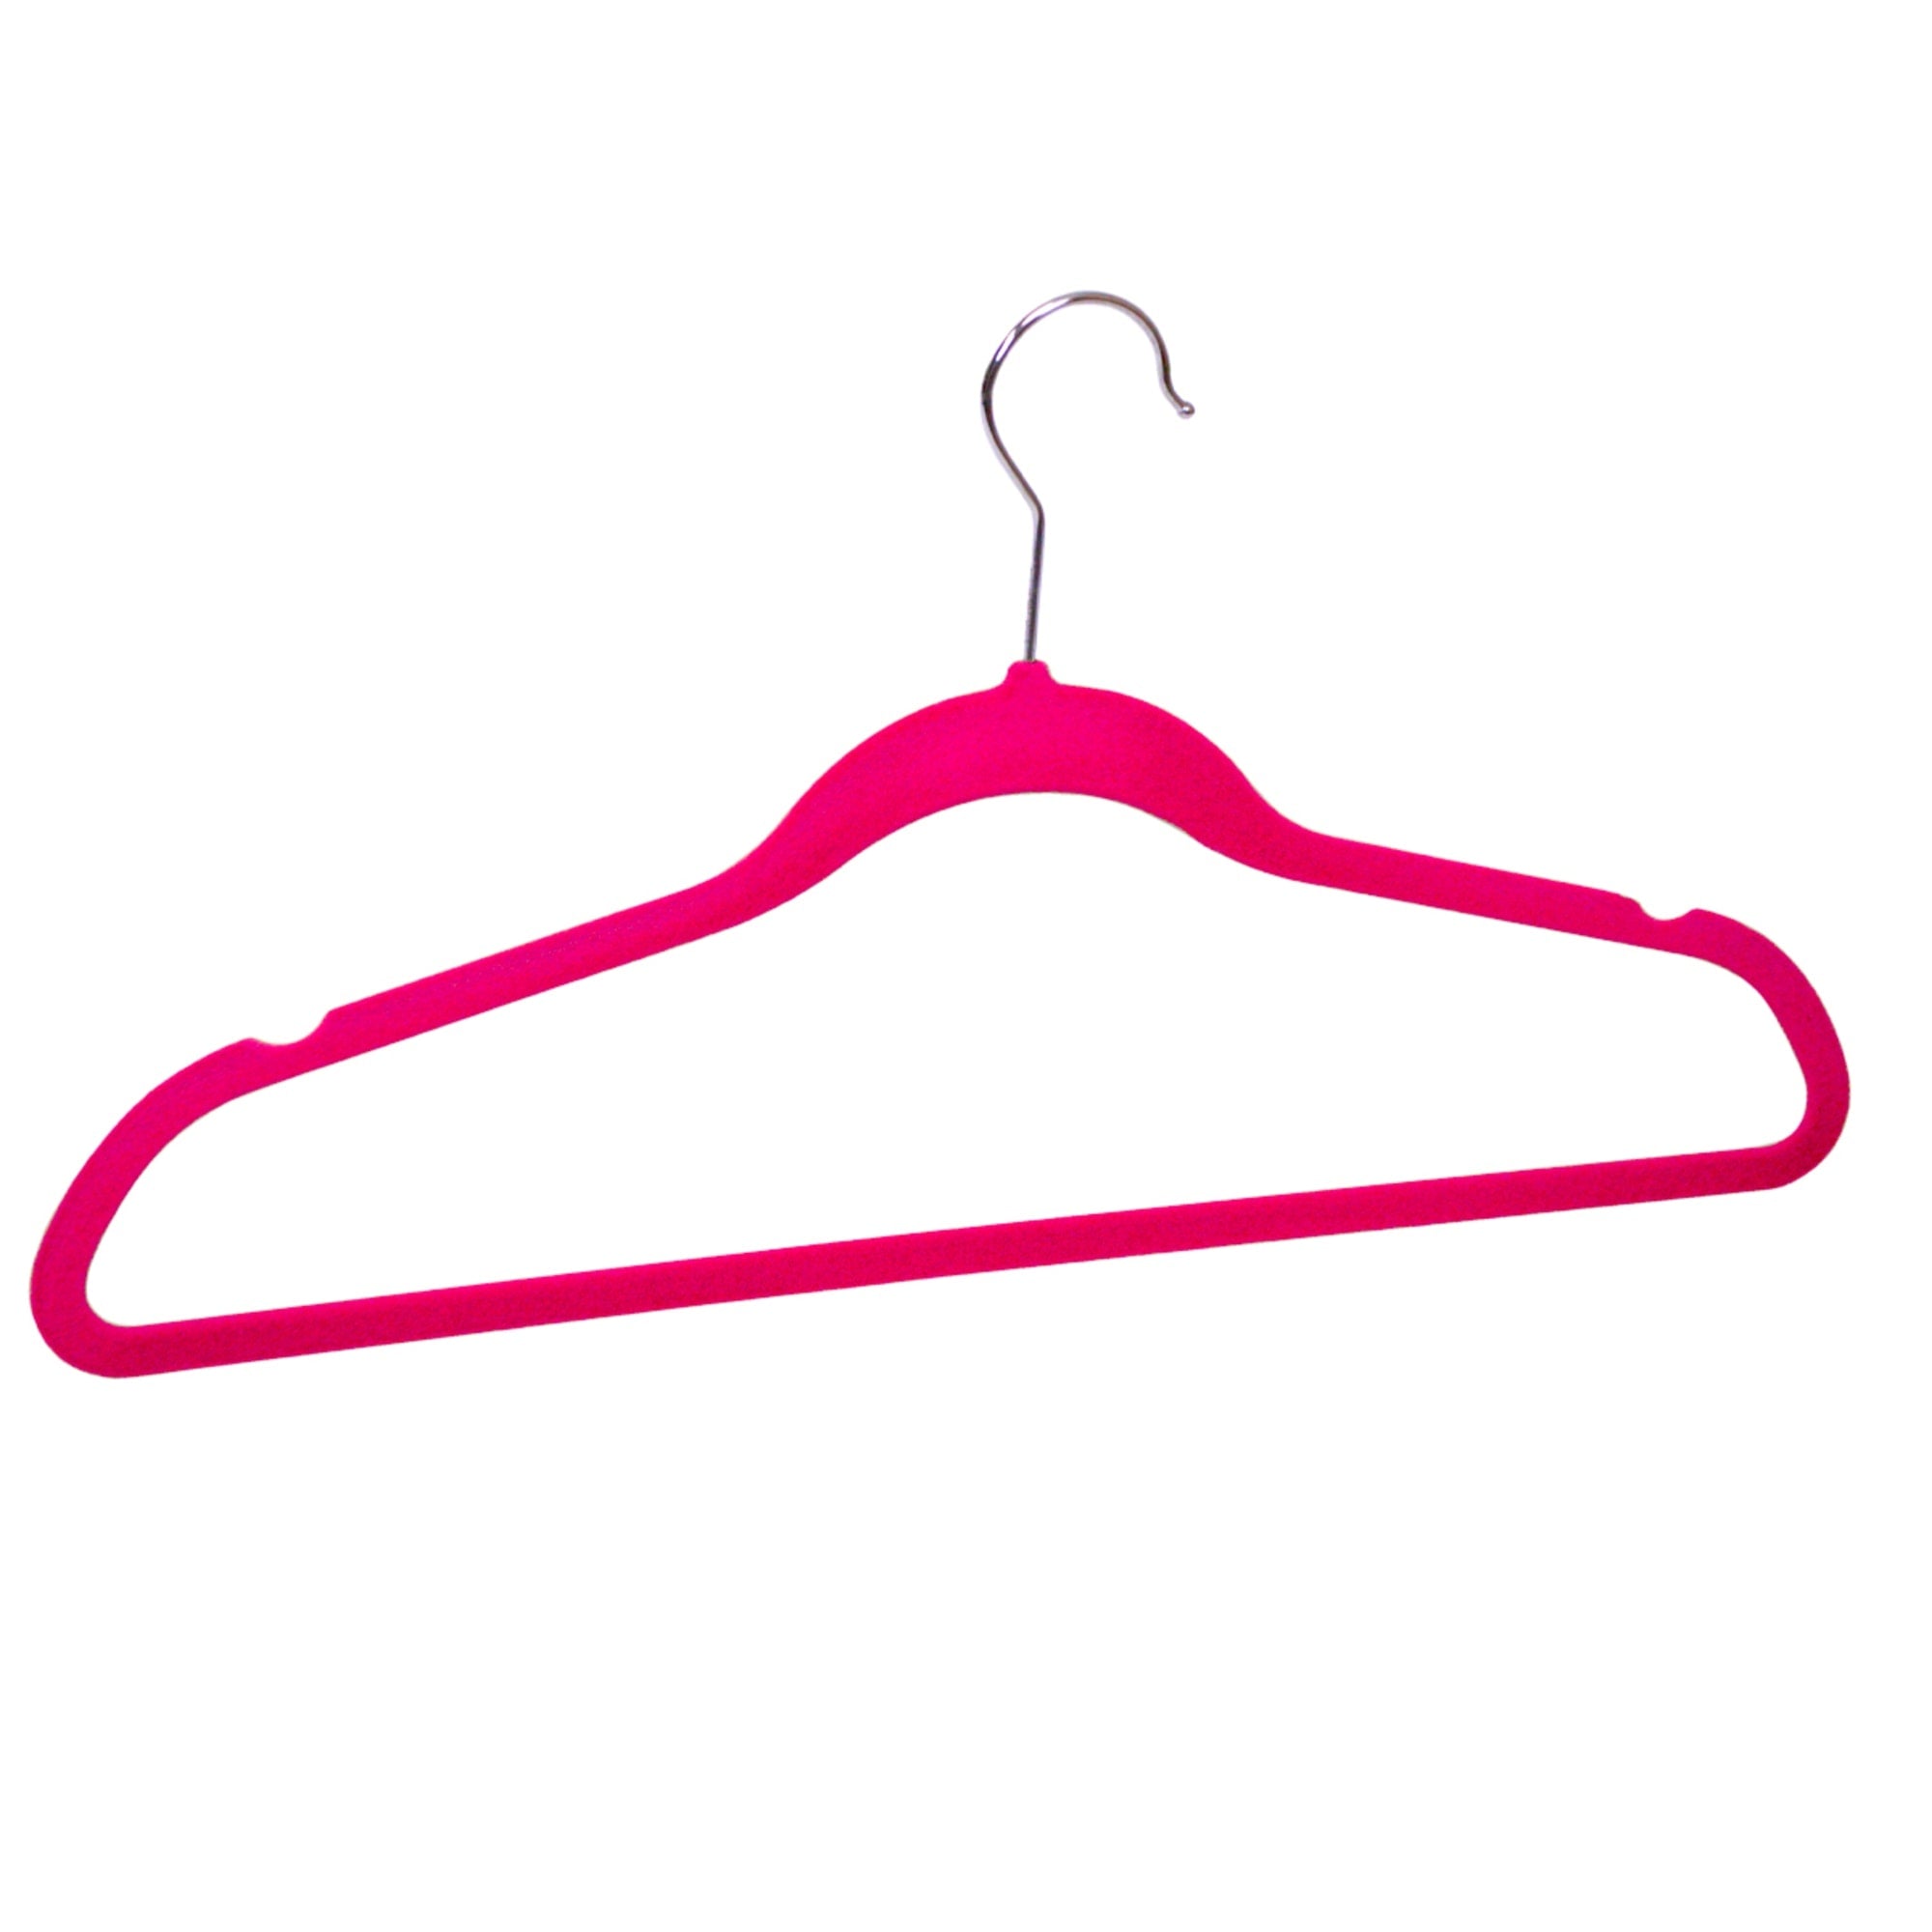 Home-it 10 Pack Clothes Hangers with clips PINK Velvet Hangers use